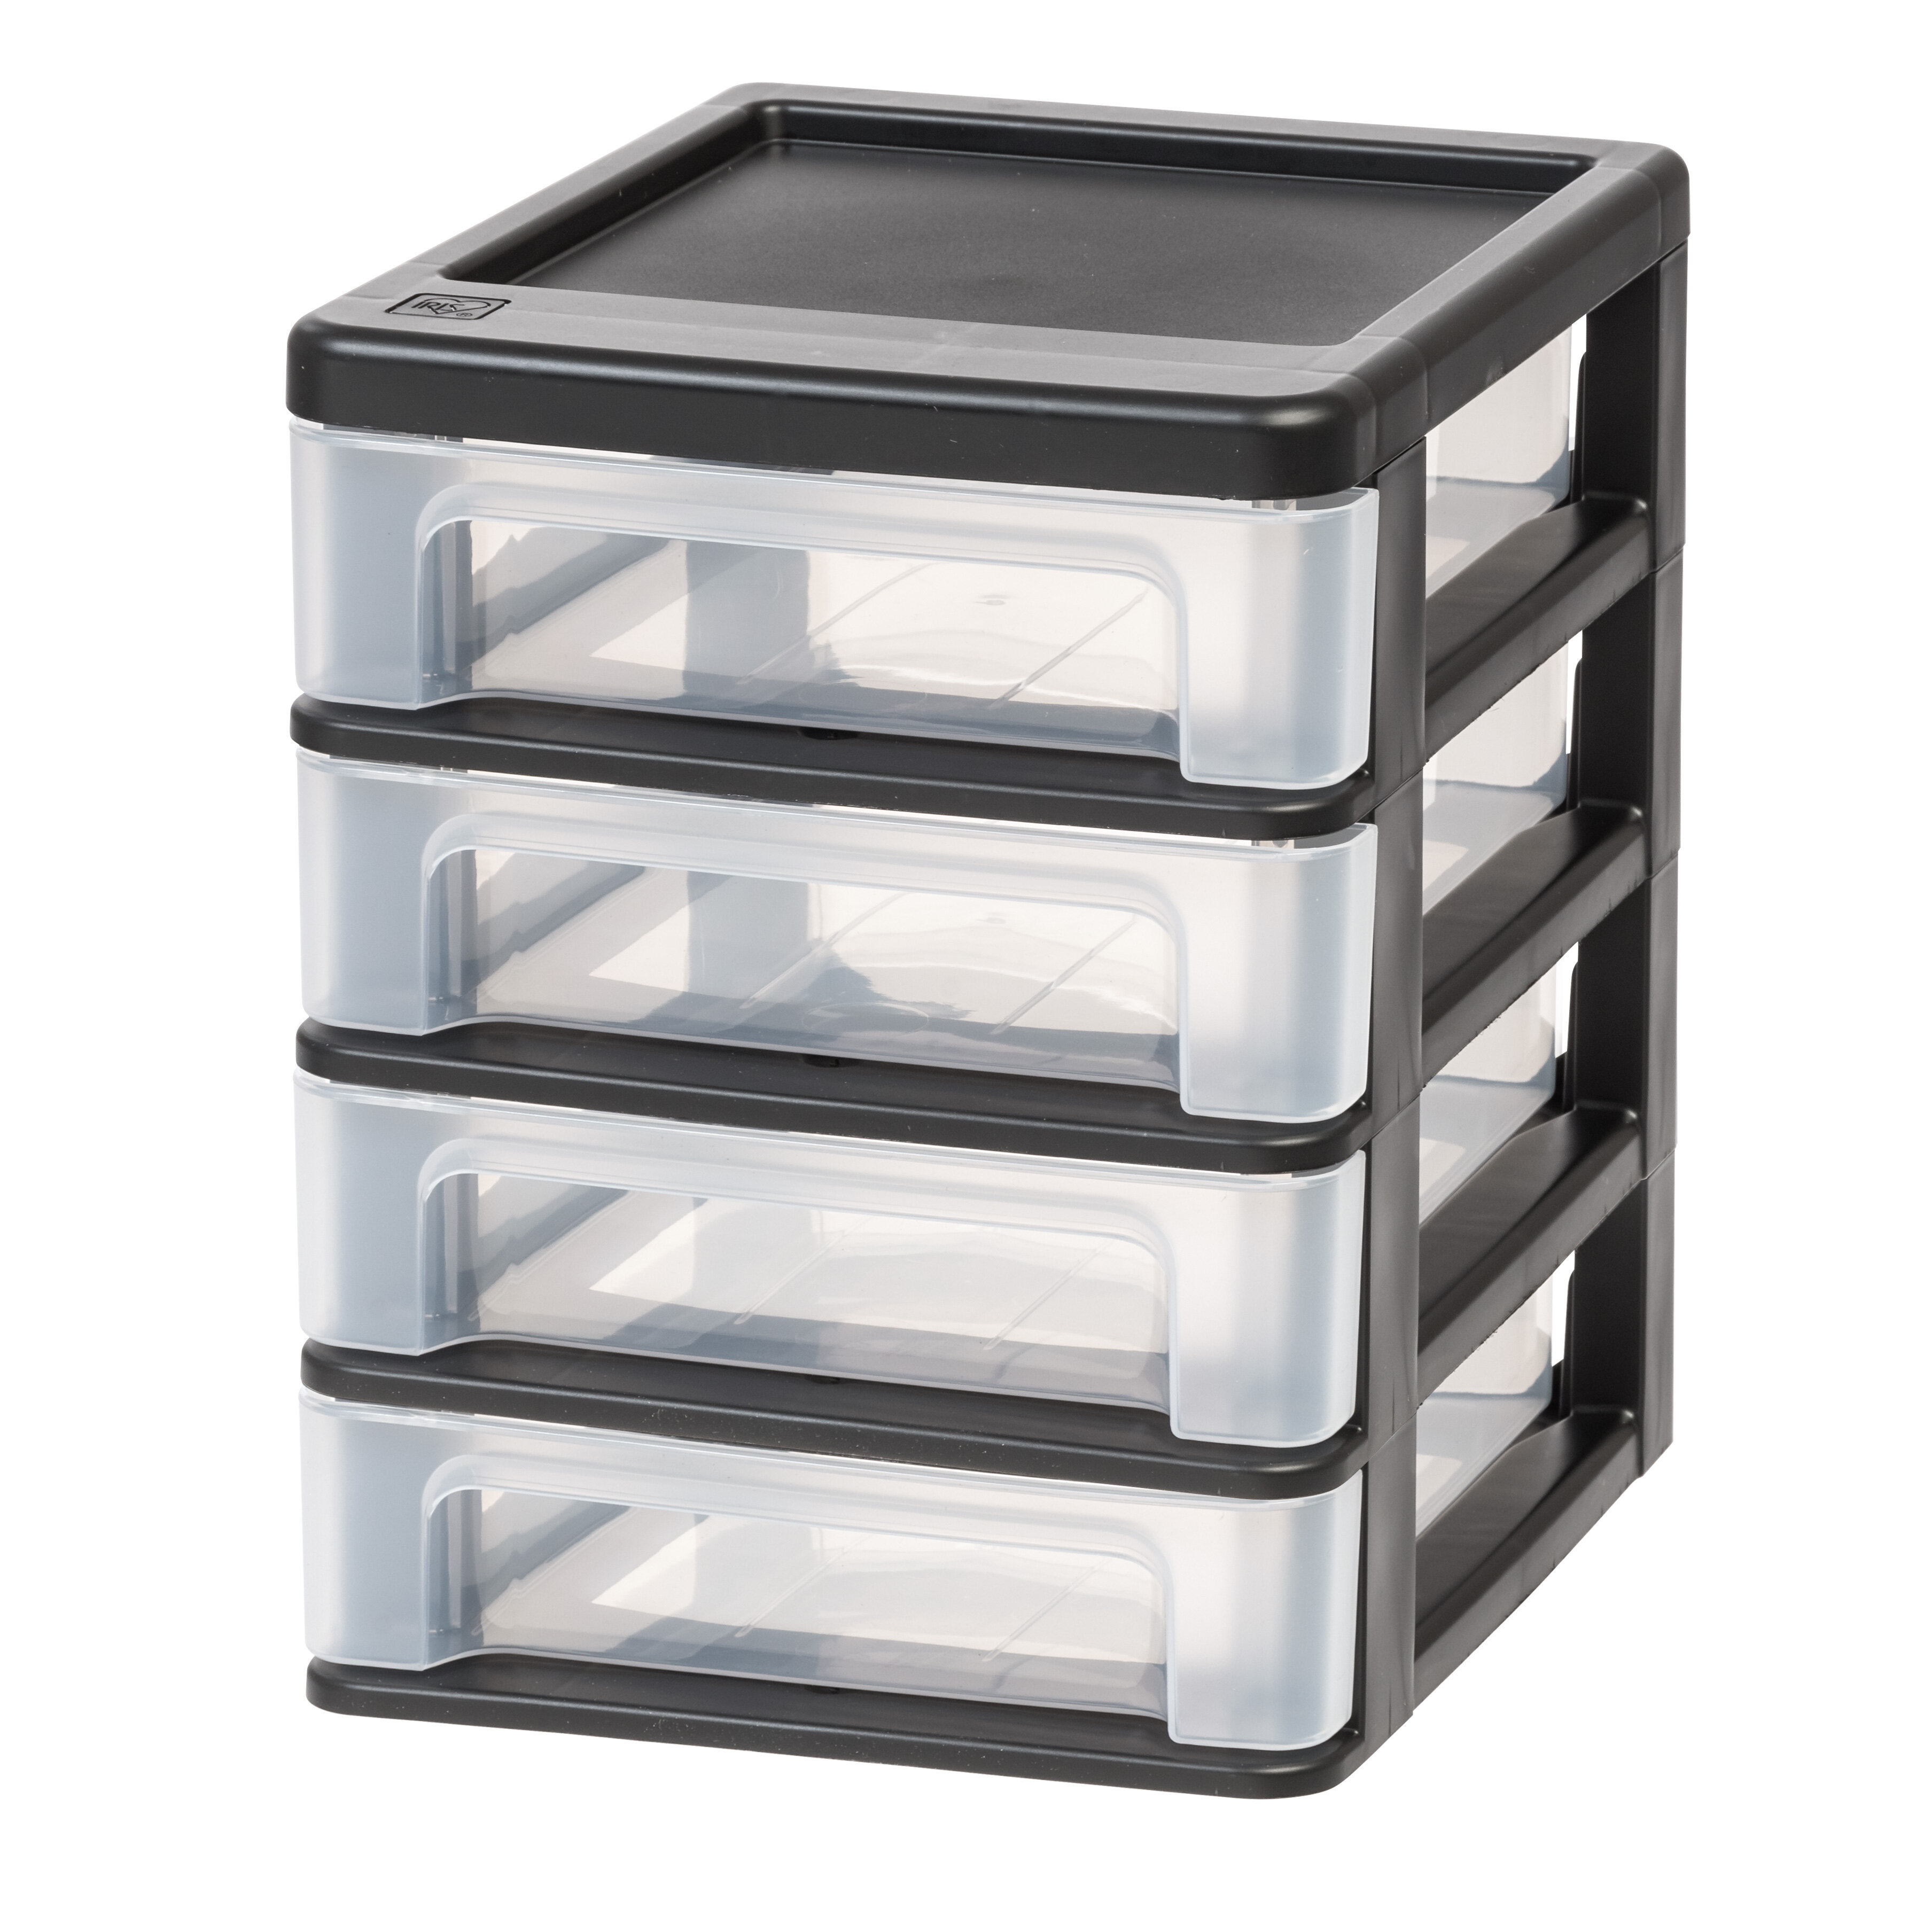 Martha Stewart Miles Plastic Stackable Office Desk Drawer Organizers, Set of 6, Clear